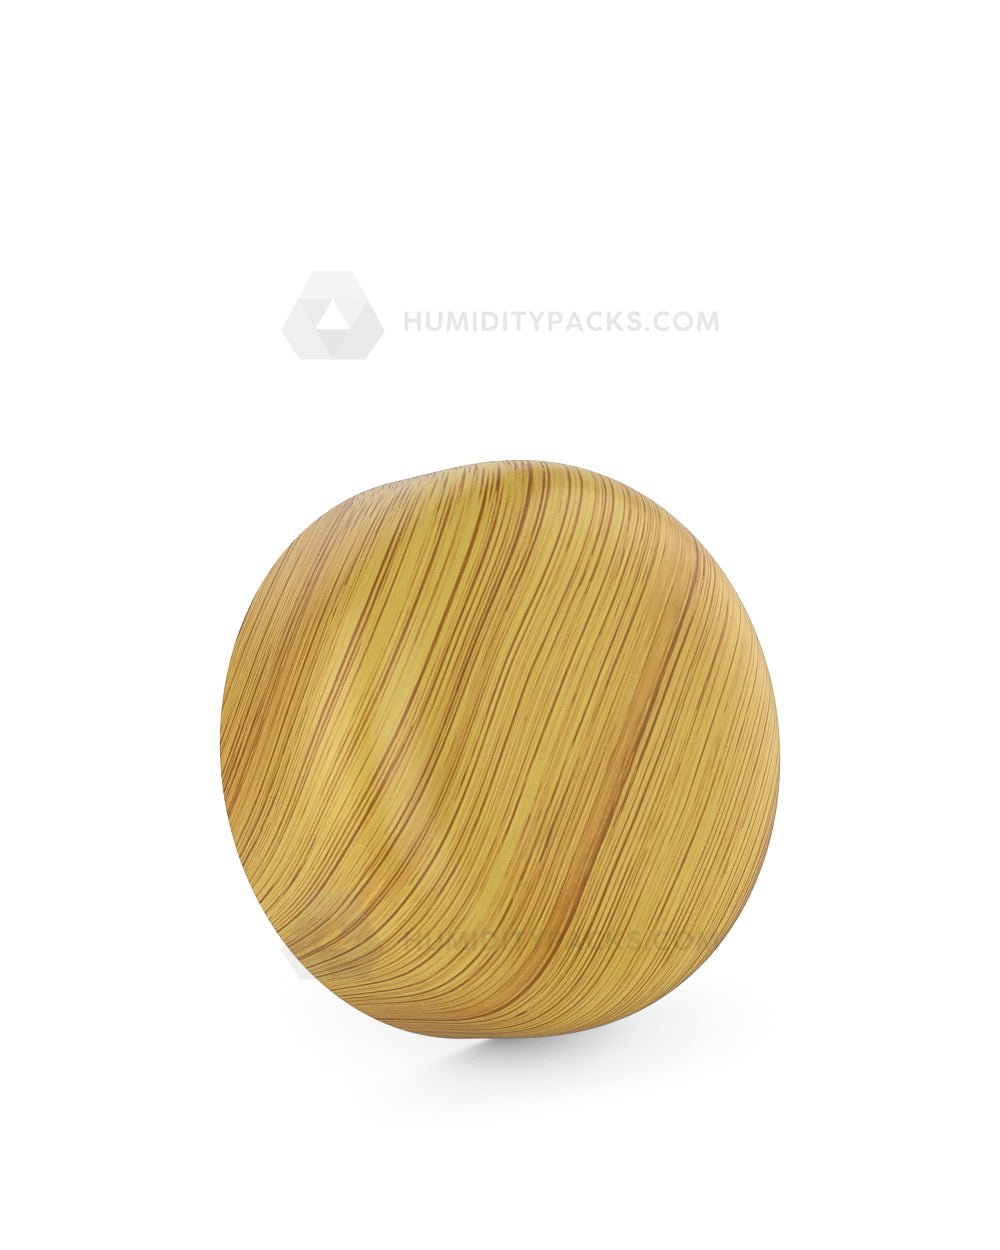 53mm Push and Turn Dome Child Resistant Plastic Caps With Foam Liner - Bamboo Wood - 120/Box Humidity Packs - 1